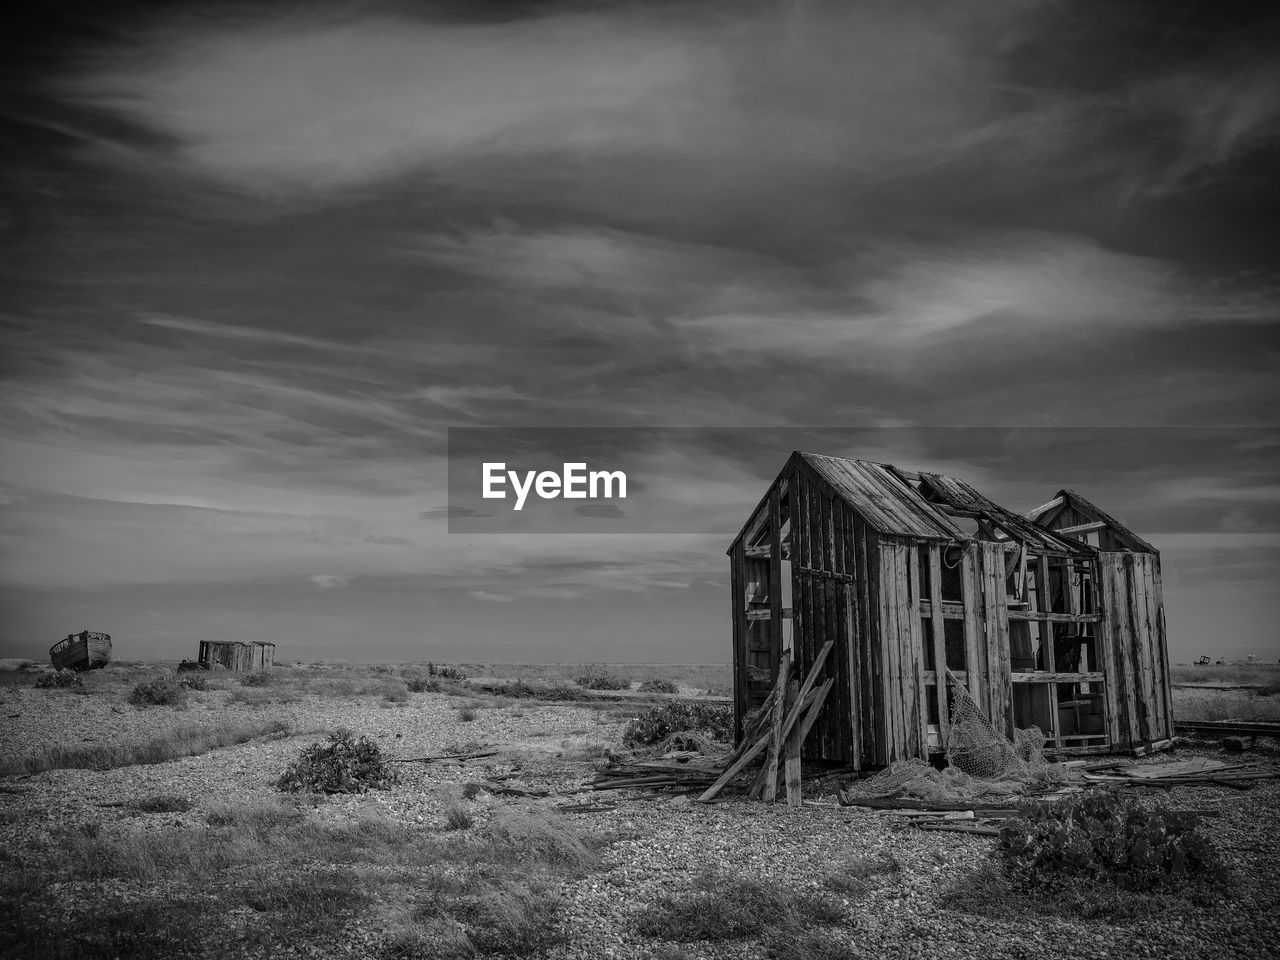 Derelict fisherman's shed, dungeness beach, kent, uk. shot in black and white. 